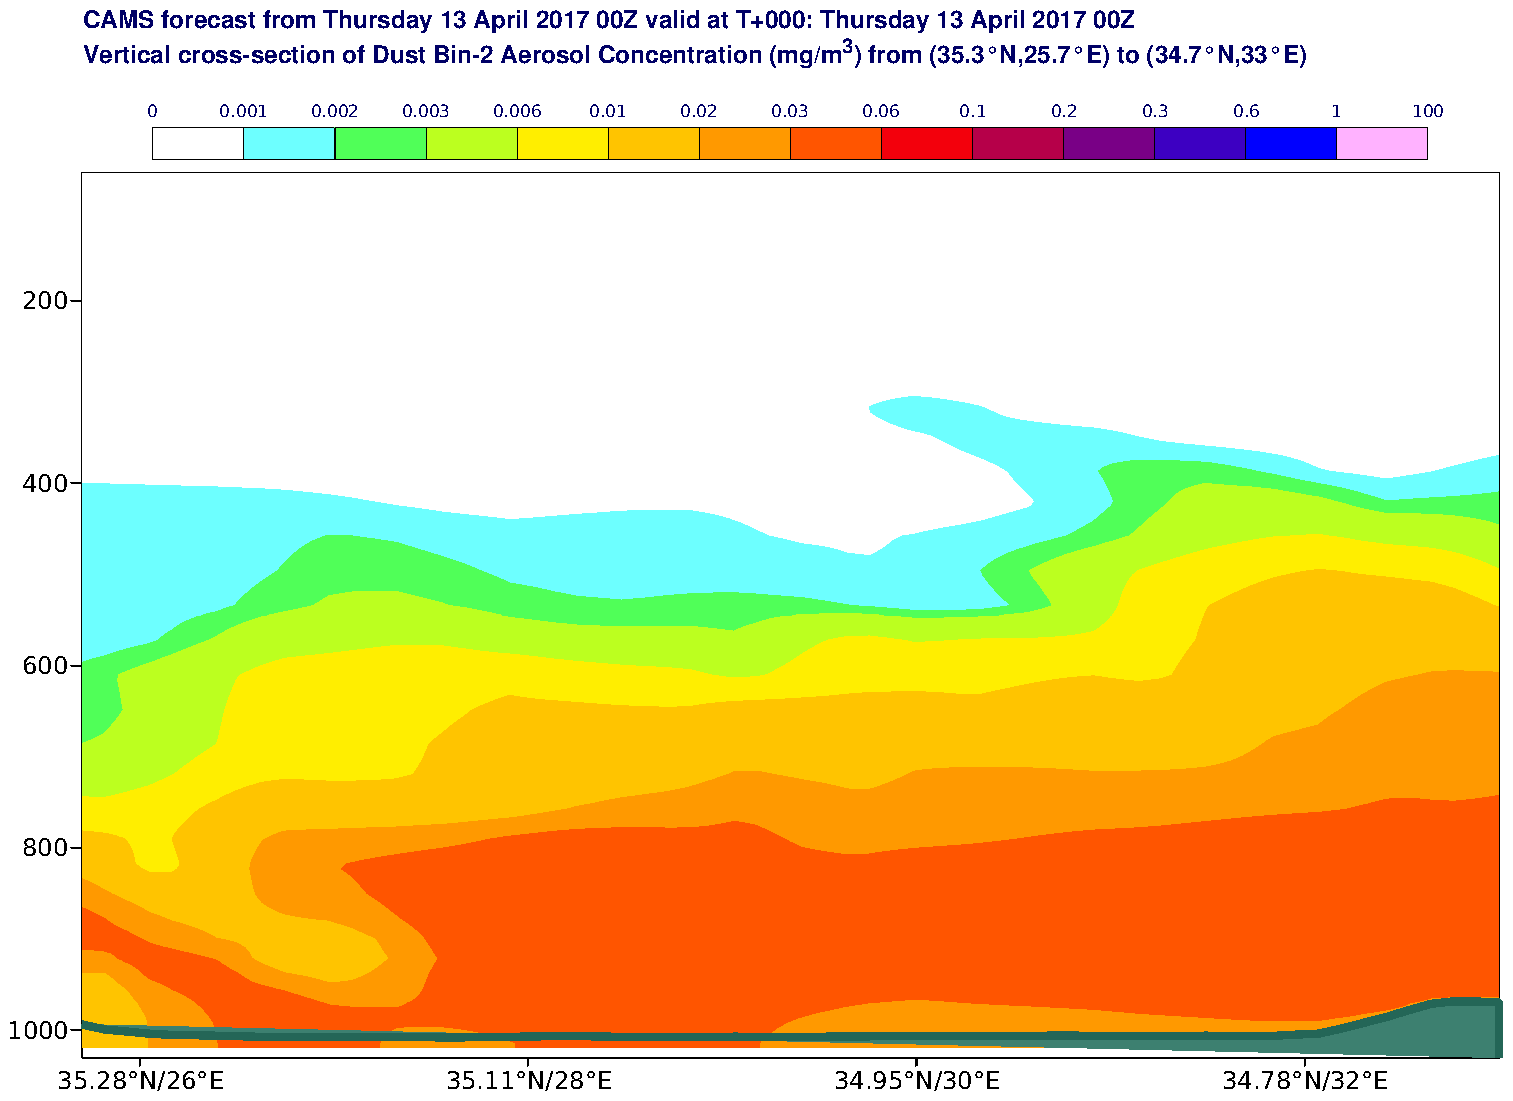 Vertical cross-section of Dust Bin-2 Aerosol Concentration (mg/m3) valid at T0 - 2017-04-13 00:00